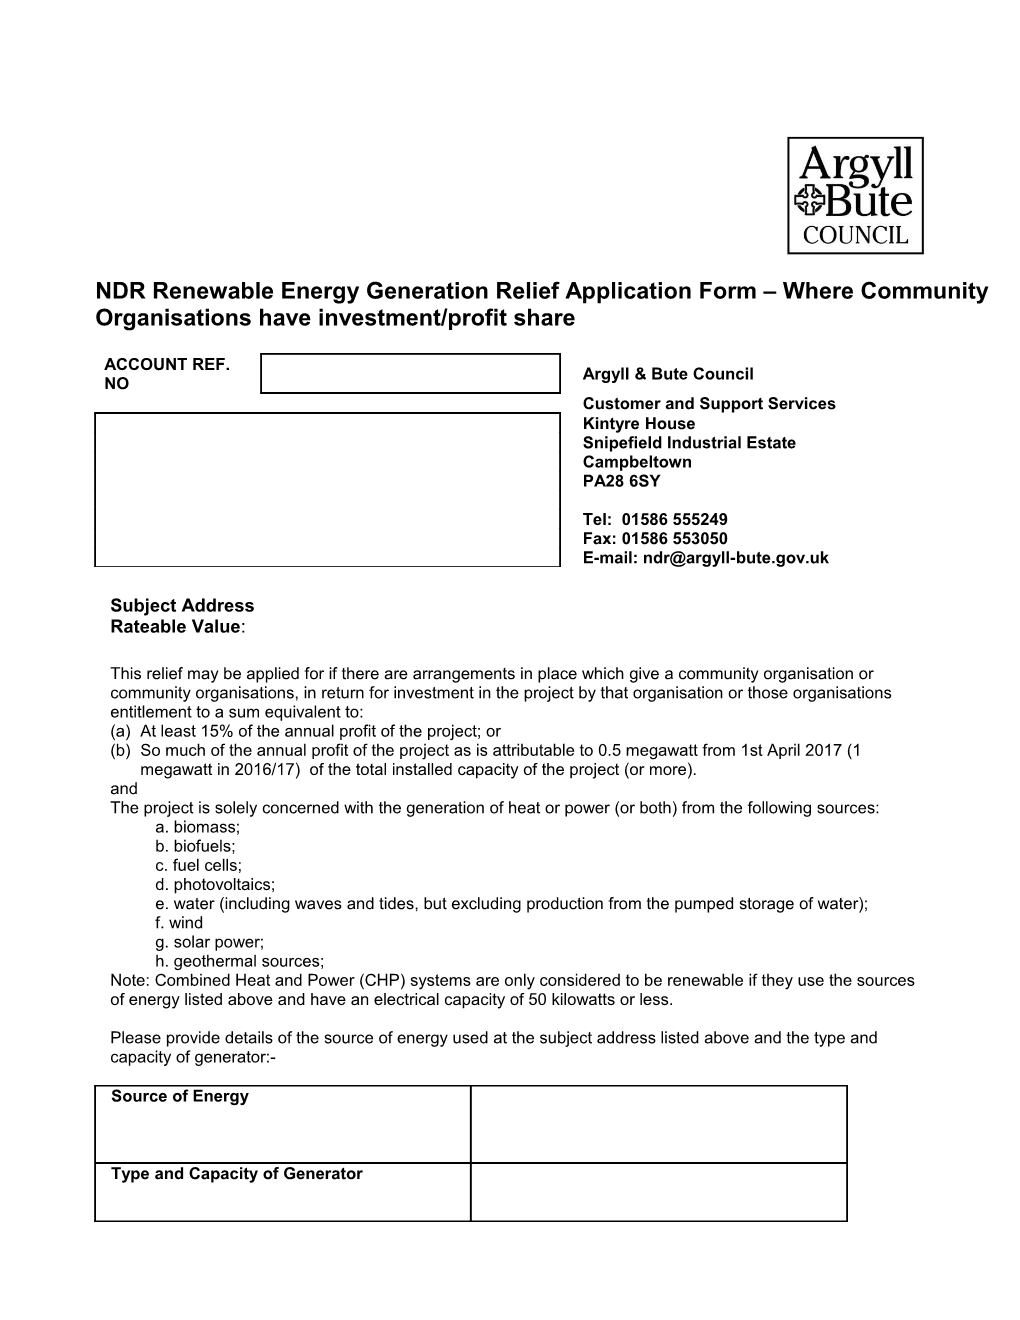 NDR Renewable Energy Generation Relief Application Form Where Community Organisations